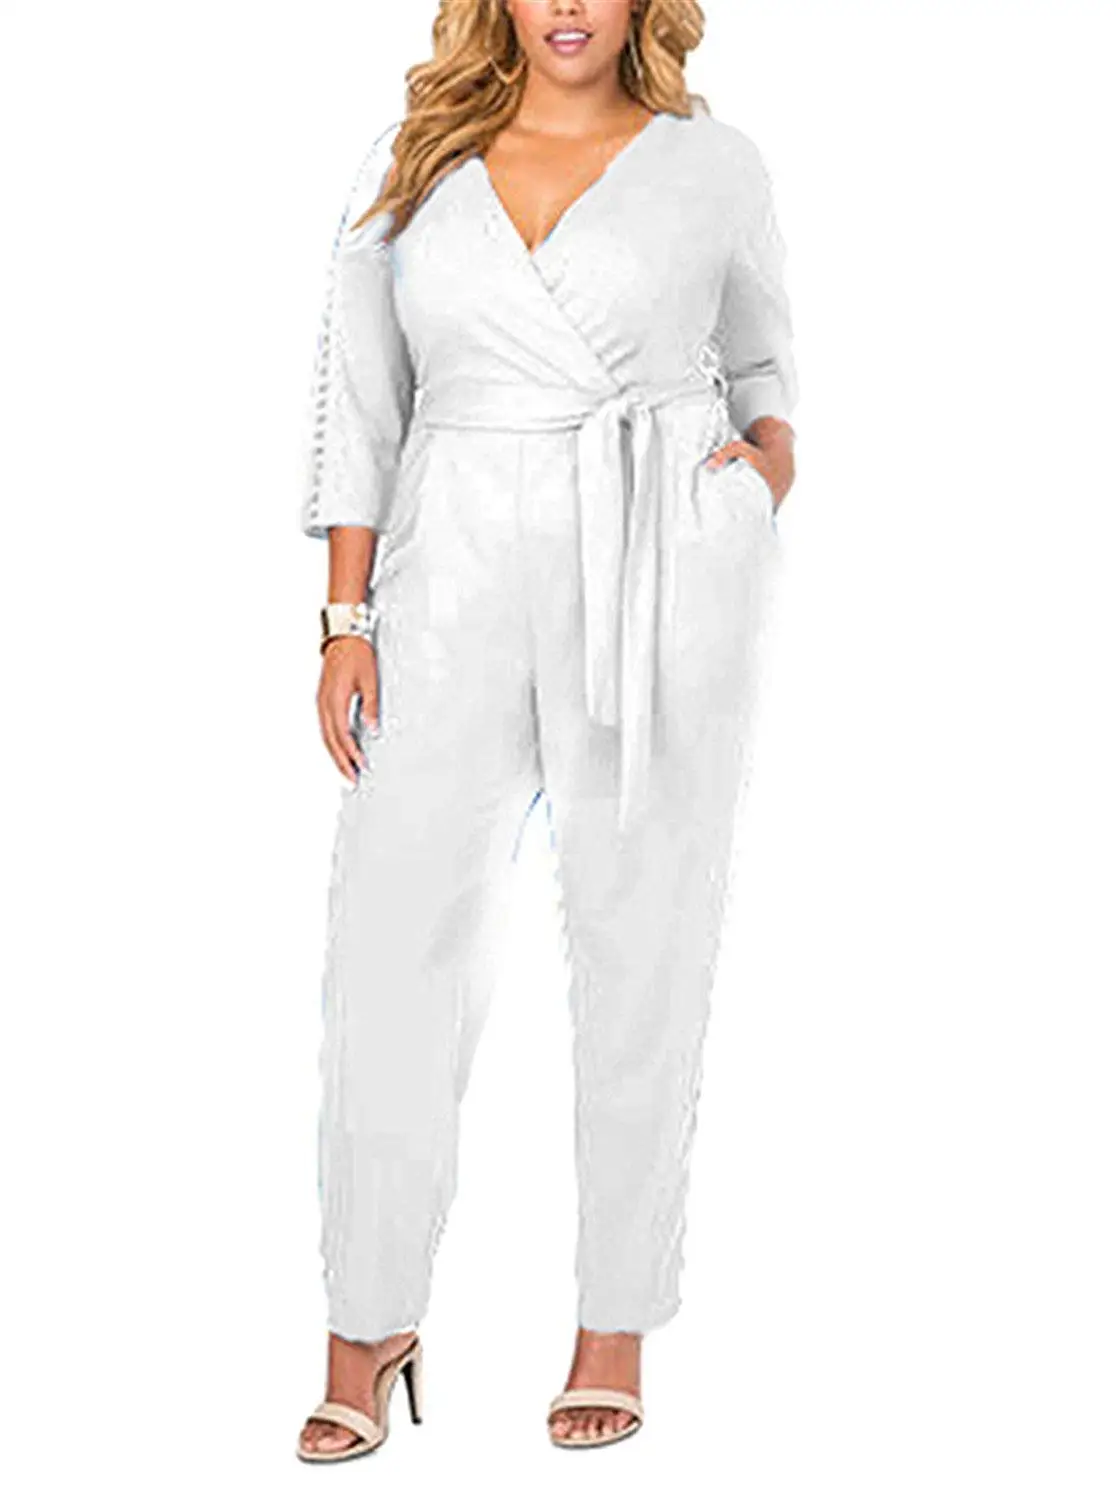 Cheap White Jumpsuits For Women Plus Size, find White Jumpsuits For ...